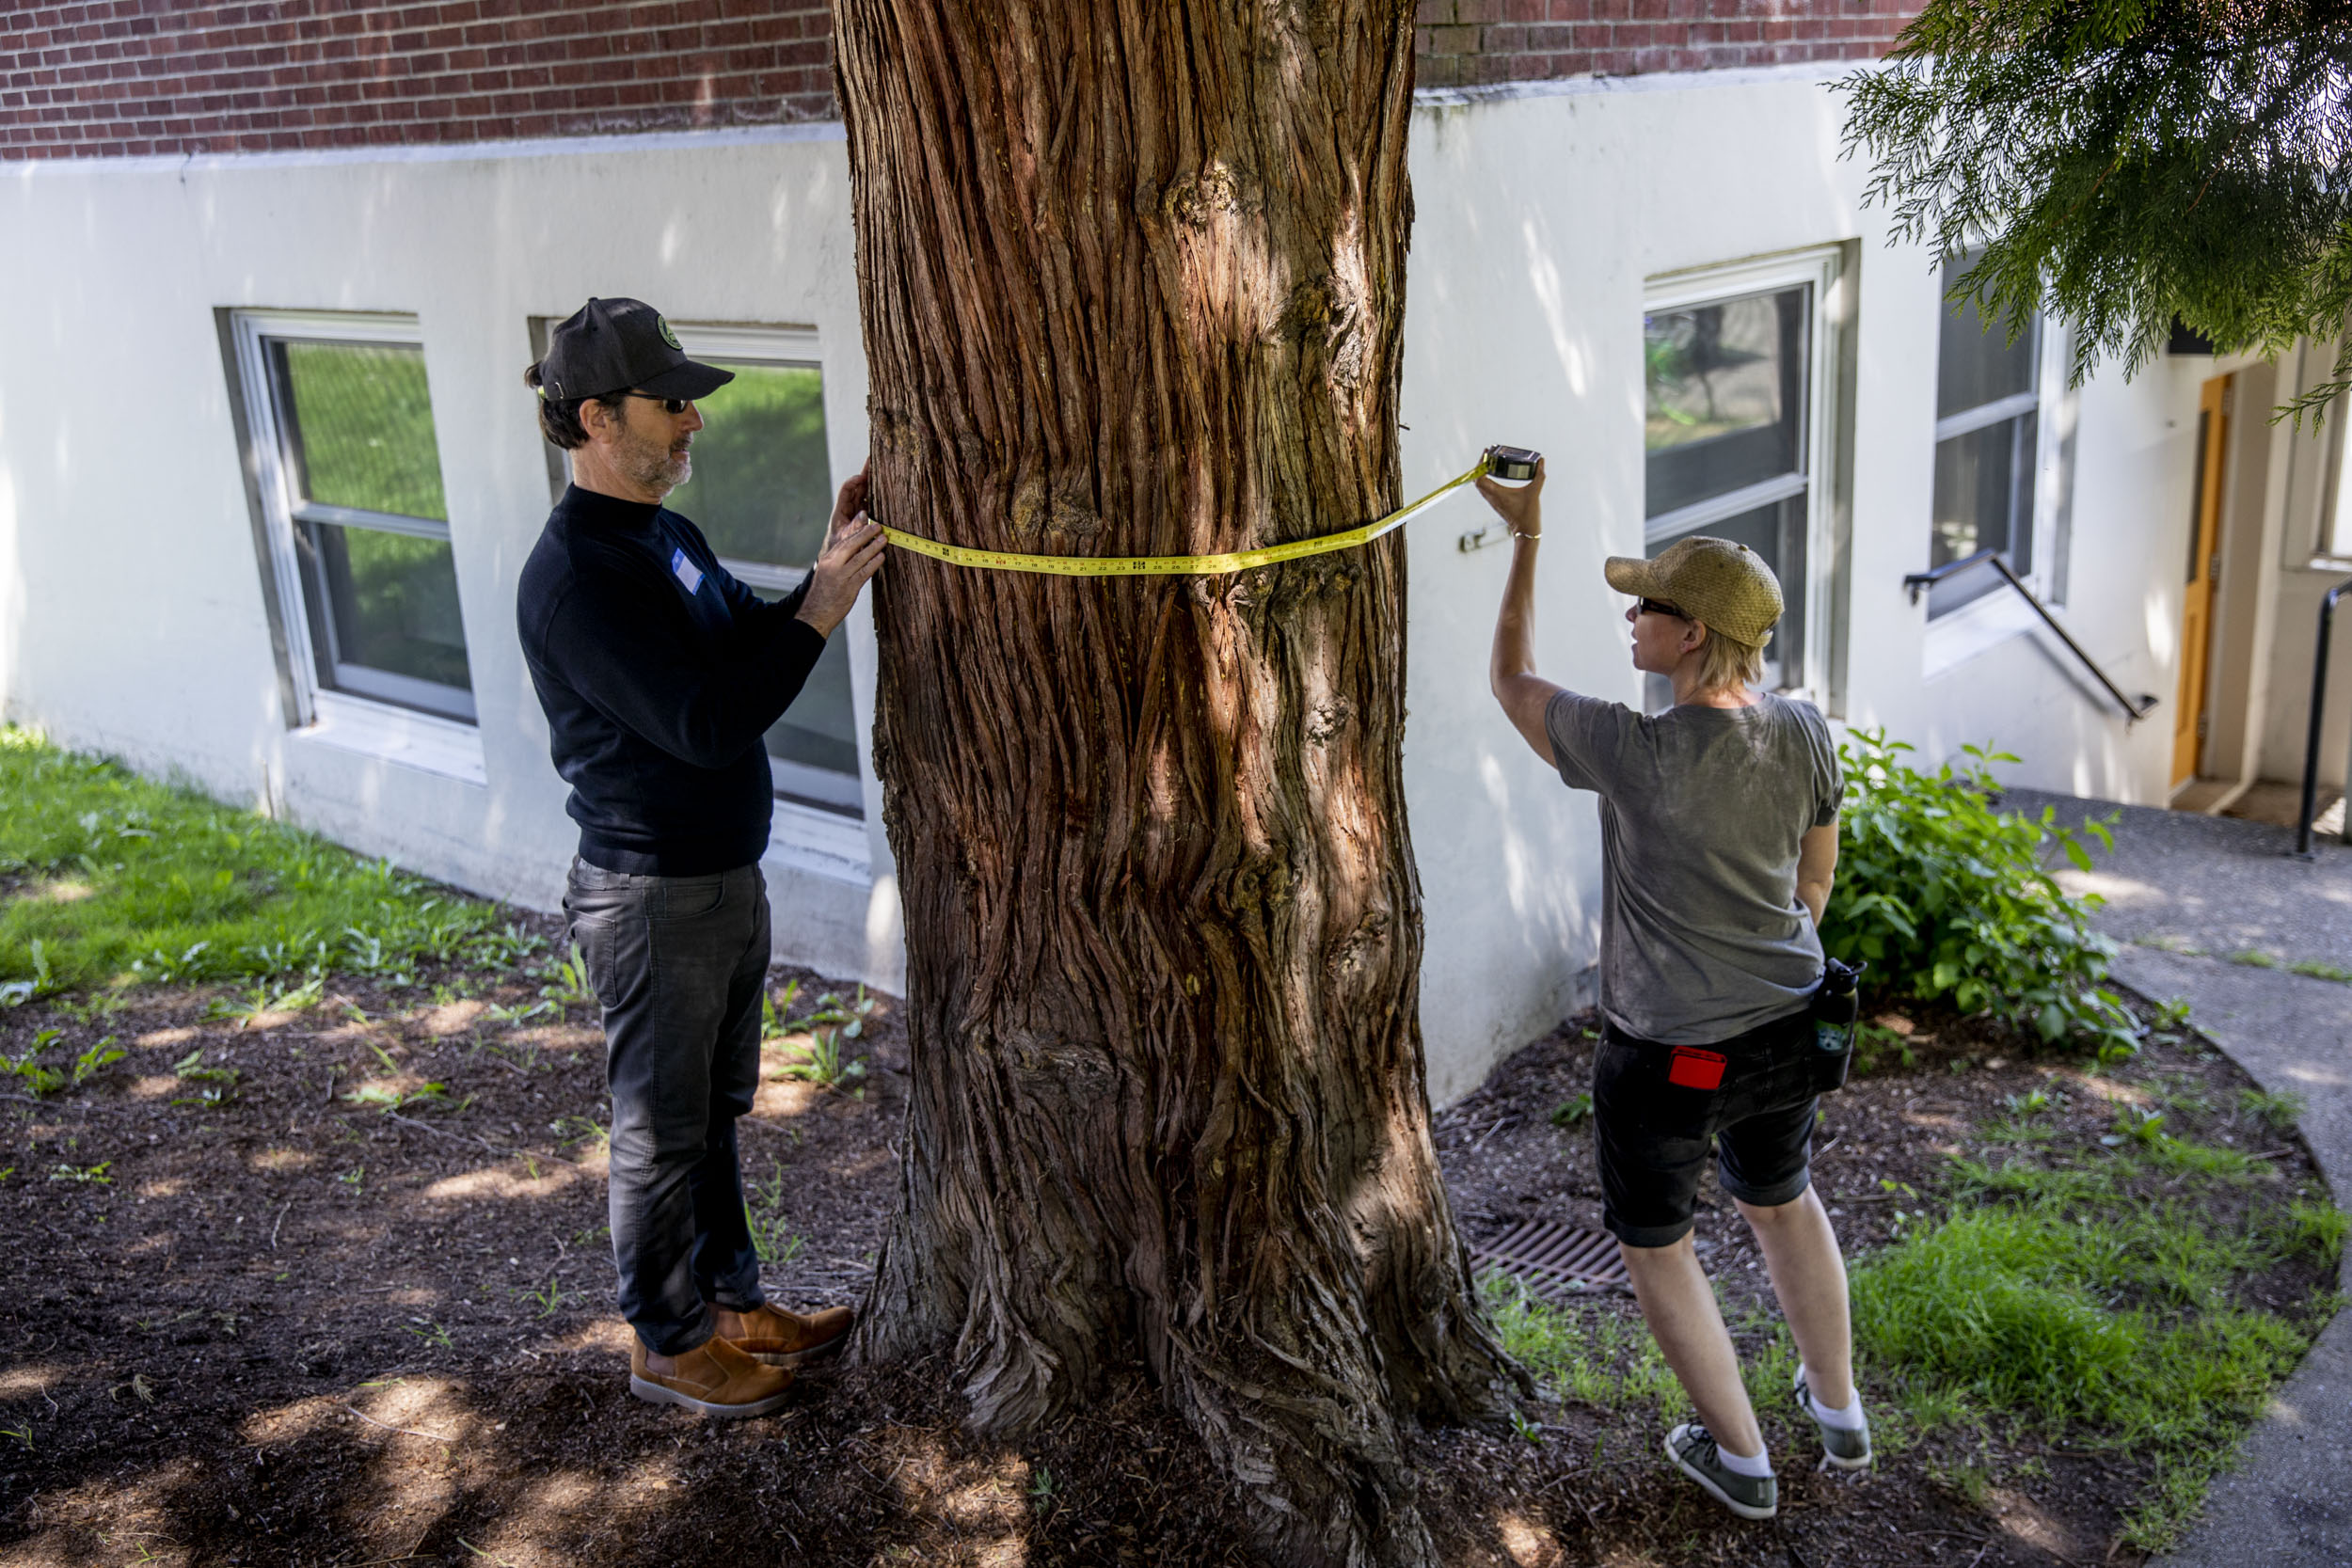 Volunteers Jim Davis, left, and Andrea Wount, both of Seattle, measure the trunk of a tree at Magnuson Park in Seattle on May 19, 2019. "Our trees have so much power, they need a voice," Davis says. "We can help." (Photo by Dorothy Edwards/Crosscut)